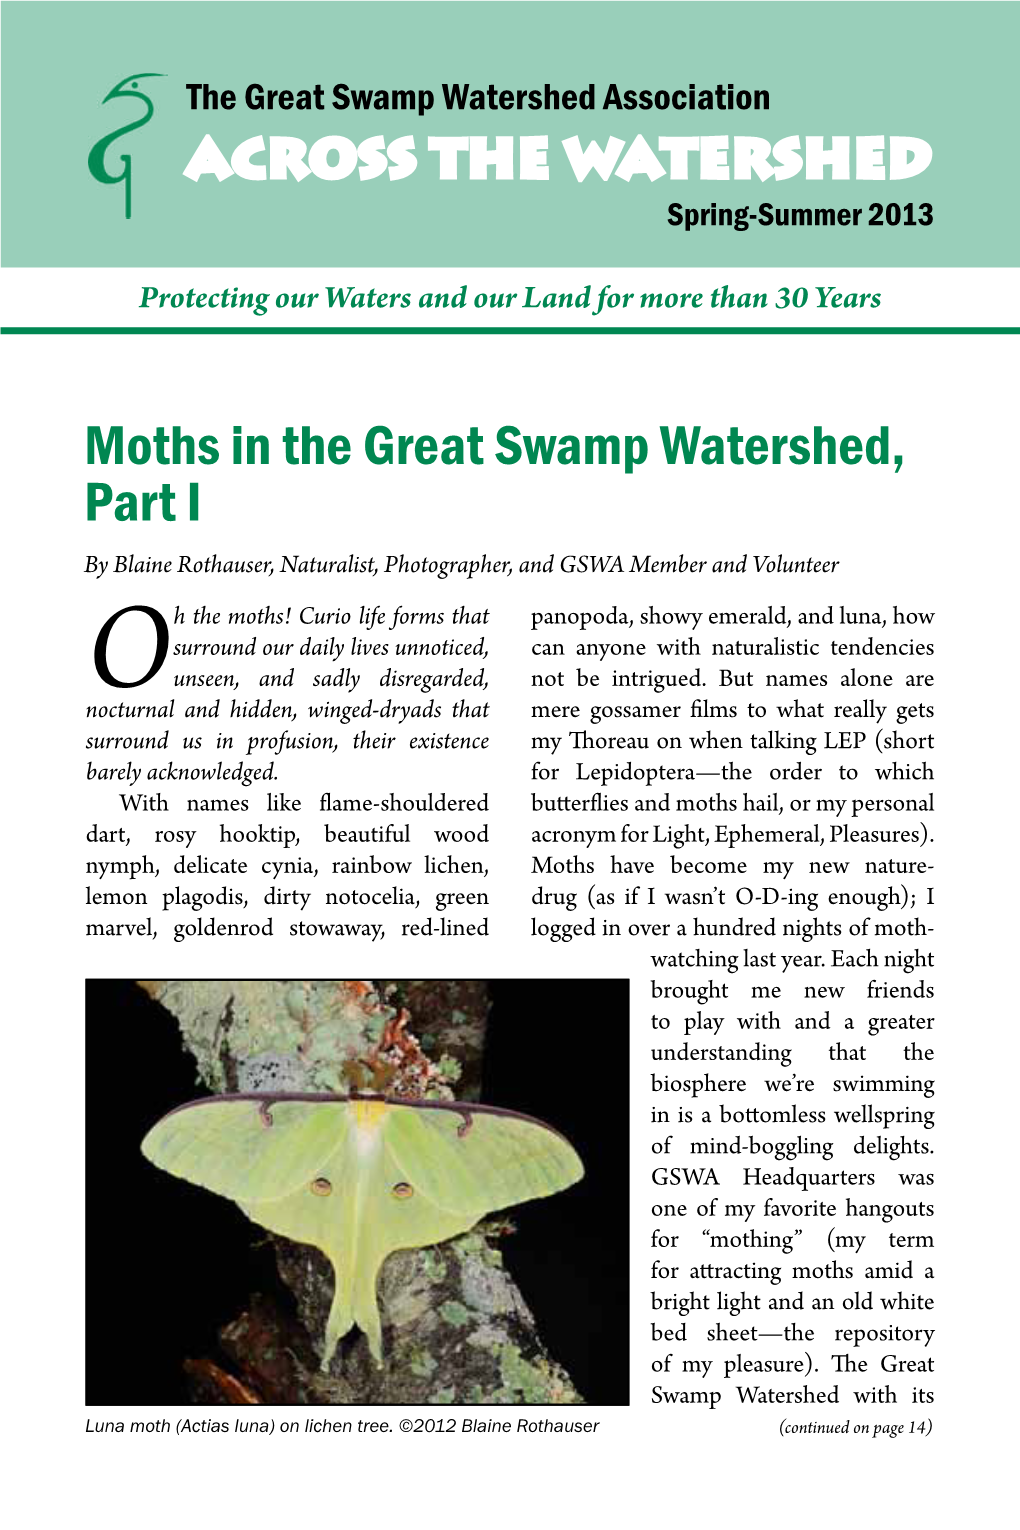 Moths in the Great Swamp Watershed, Part I